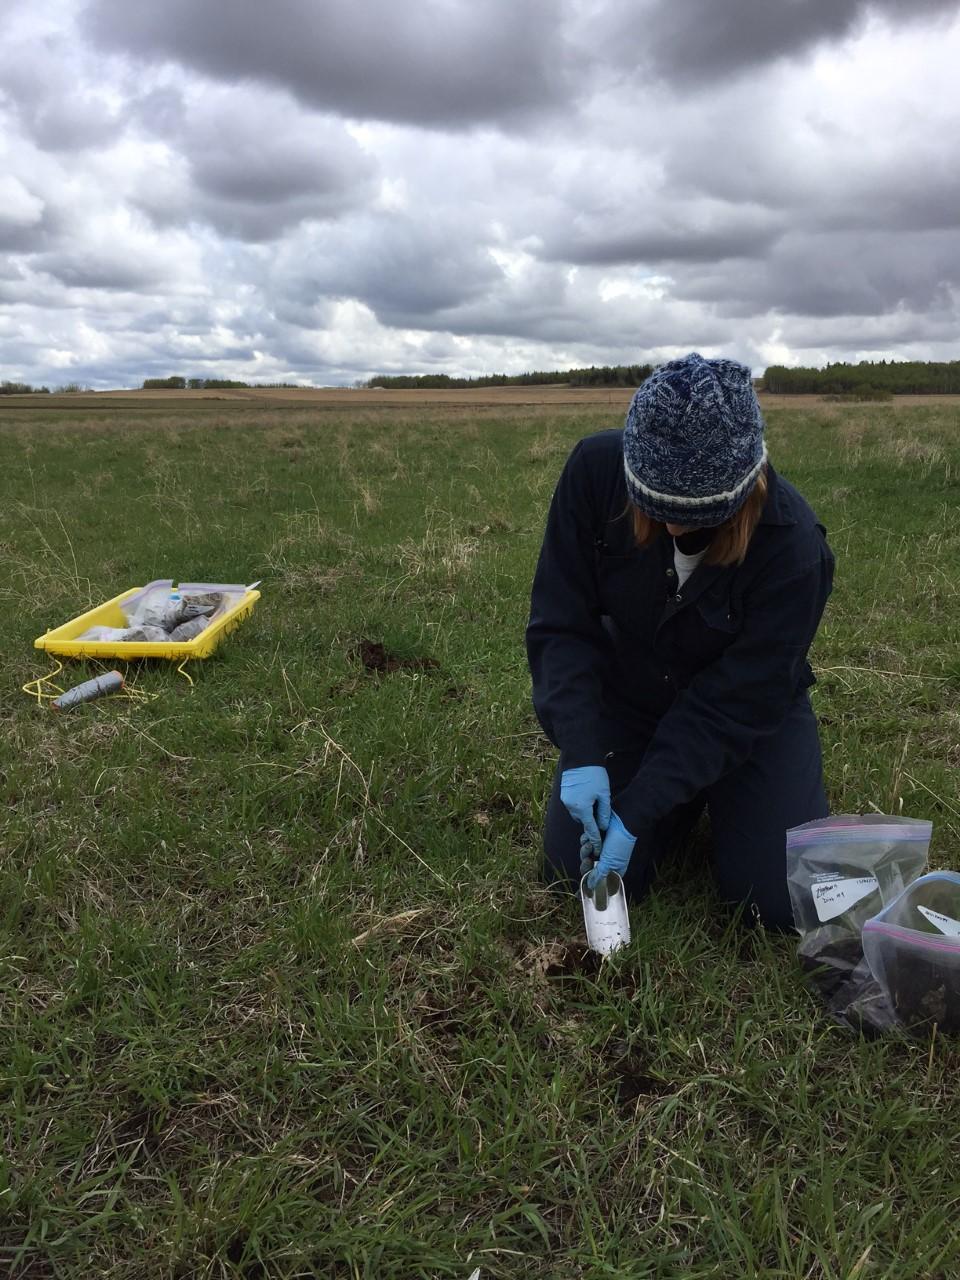 Cow feces samples are being collected at 20 cattle ranches across Western Canada as part of the parasitic roundworm study.